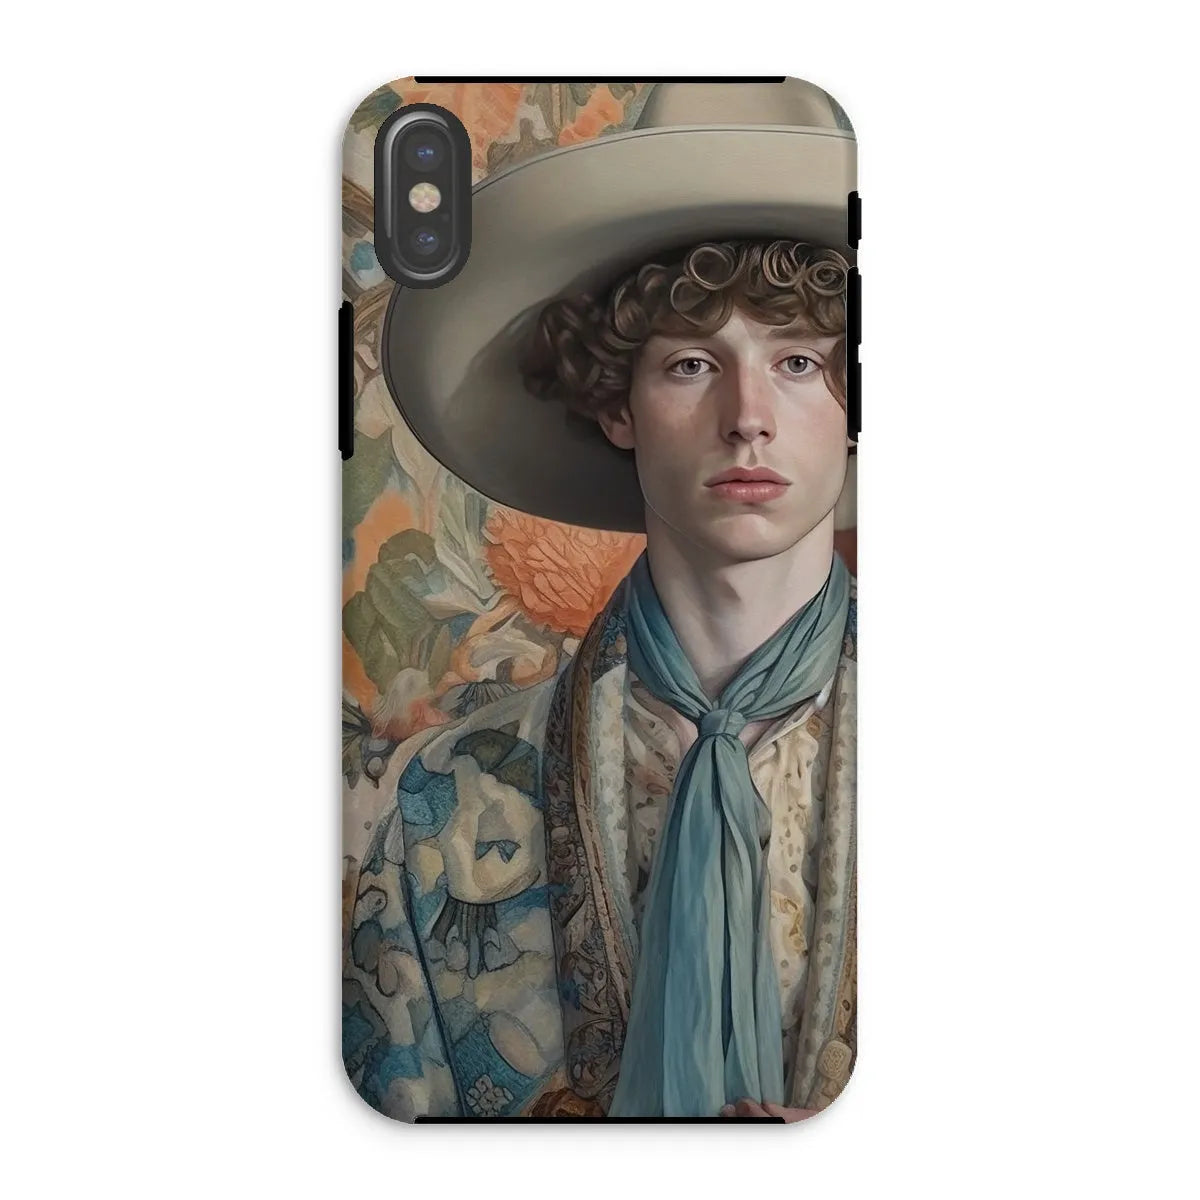 Theodore The Gay Cowboy - Dandy Gay Men Art Phone Case - Iphone Xs / Matte - Mobile Phone Cases - Aesthetic Art